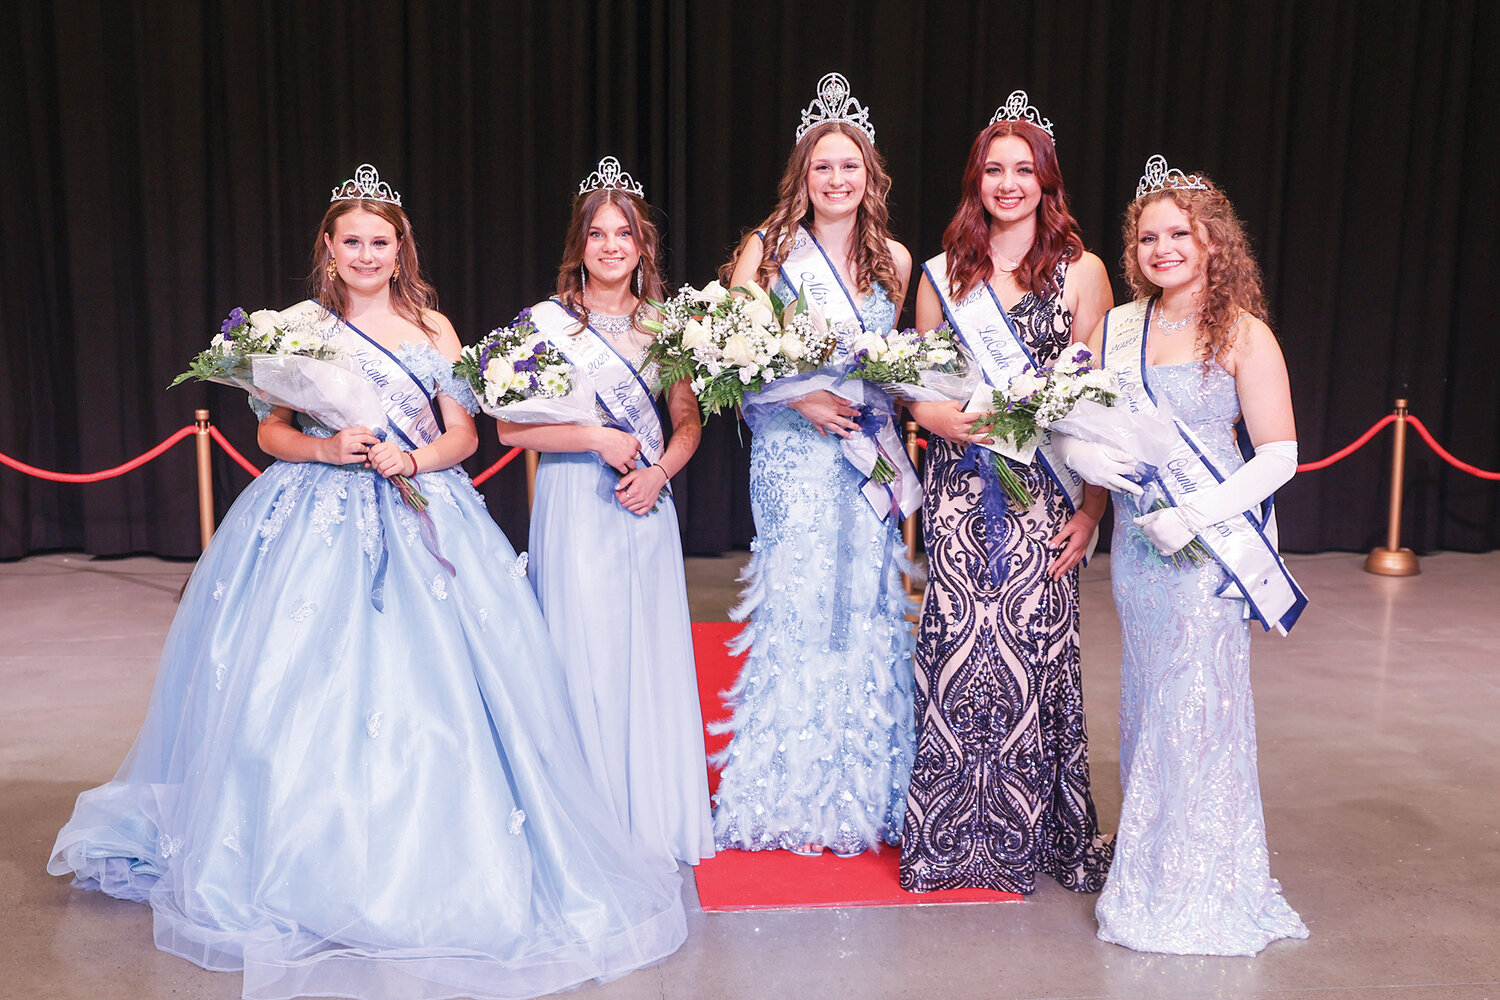 The Miss Teen La Center Scholarship Pageant celebrated 20 years this year at the La Center Our Days festival, July 29. The pageant expanded to include all of North County. This year’s court is (from left to right): 
Fourth-runner up Savannah Terrill, 14, a freshman at La Center High School
Third-runner up Sara Schtezel, 14, a freshman at Cedar Tree Christian School, in Ridgefield; 
Miss Teen La Center 2023 Kylee Mills, 14, a freshman at La Center High School;
First runner-up Leah Lee, 16, a junior at Battle Ground High School;
Second runner-up Adrionna McClellan, 15, a sophomore at Battle Ground High School.